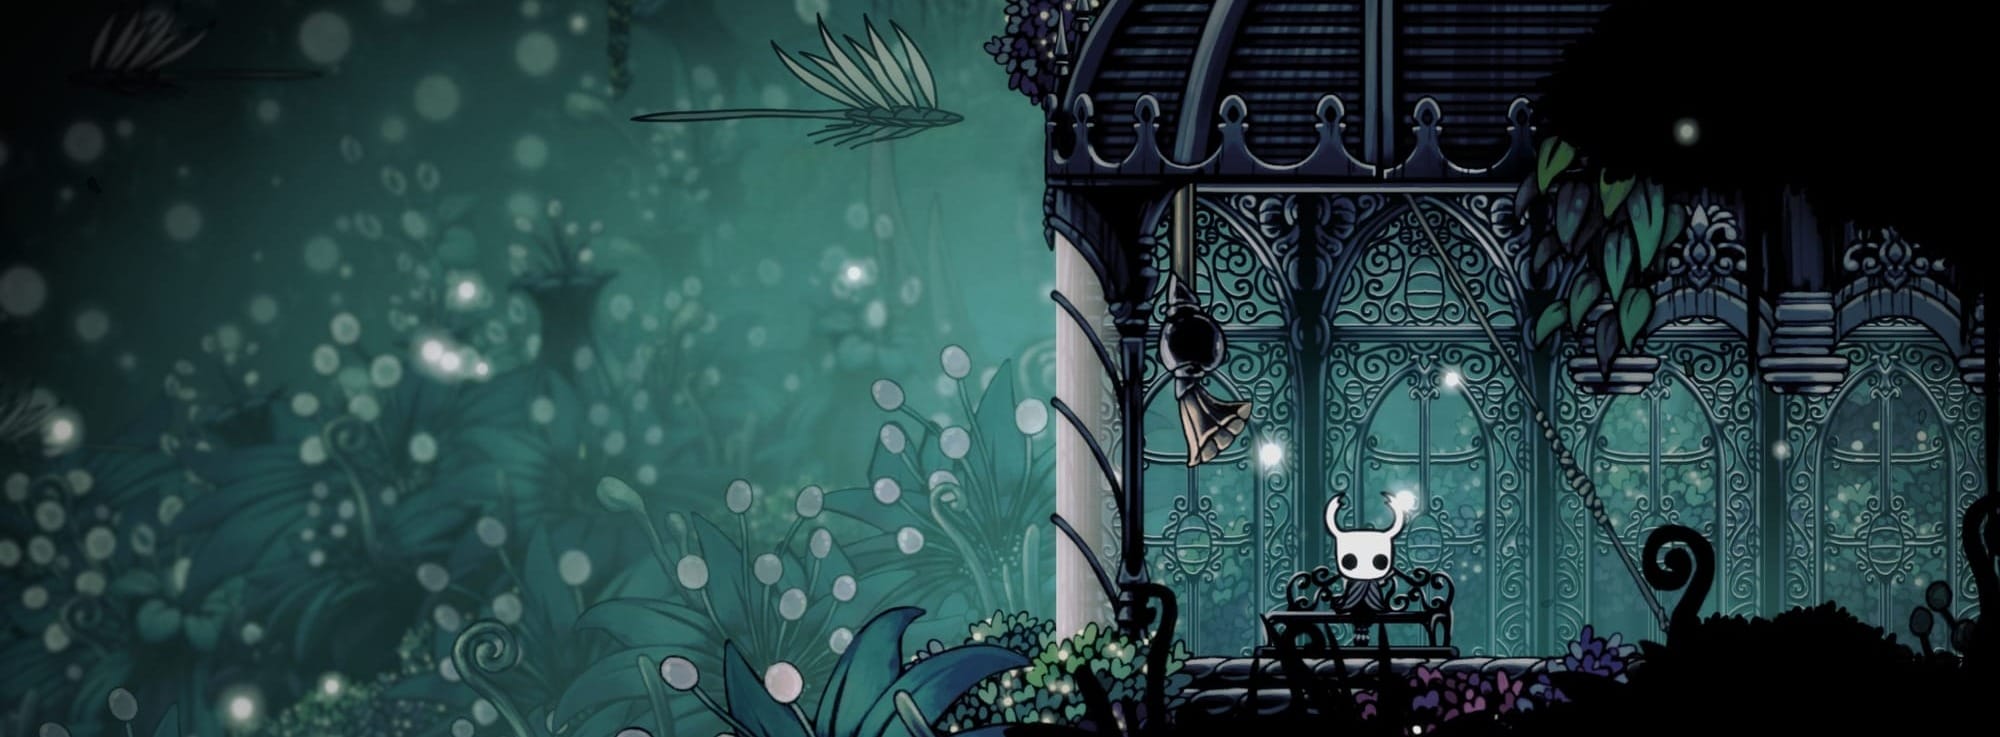 A screenshot from the Hollow Knight game, where the main character (white bug-like warrior) peacfully sits on a bench in some gazebo.